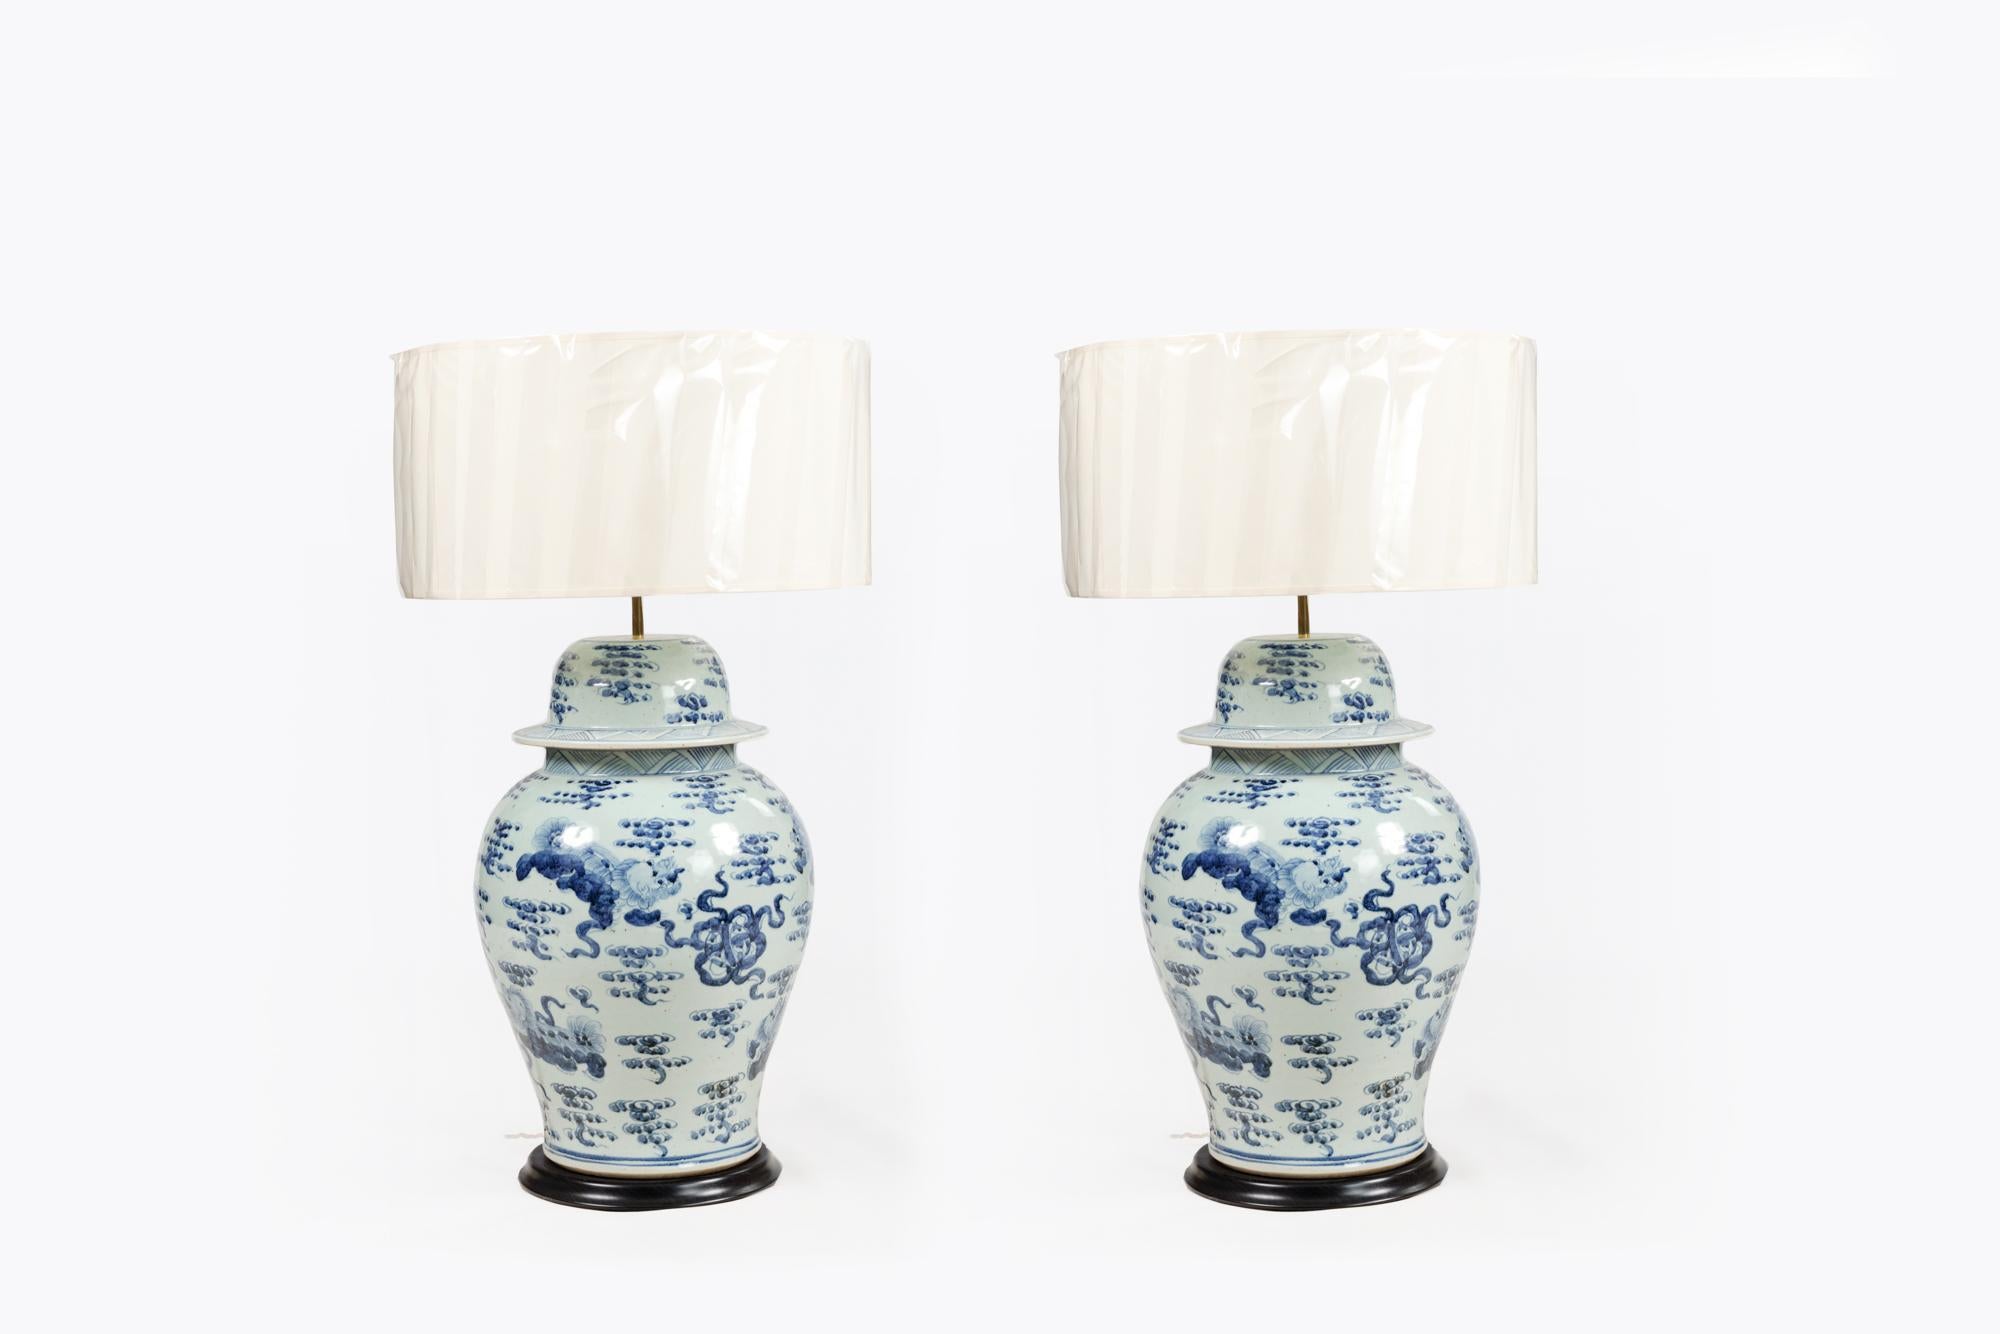 Chinese Export Large Pair of Early 20th Century Blue & White Ginger Jars Converted to Lamps